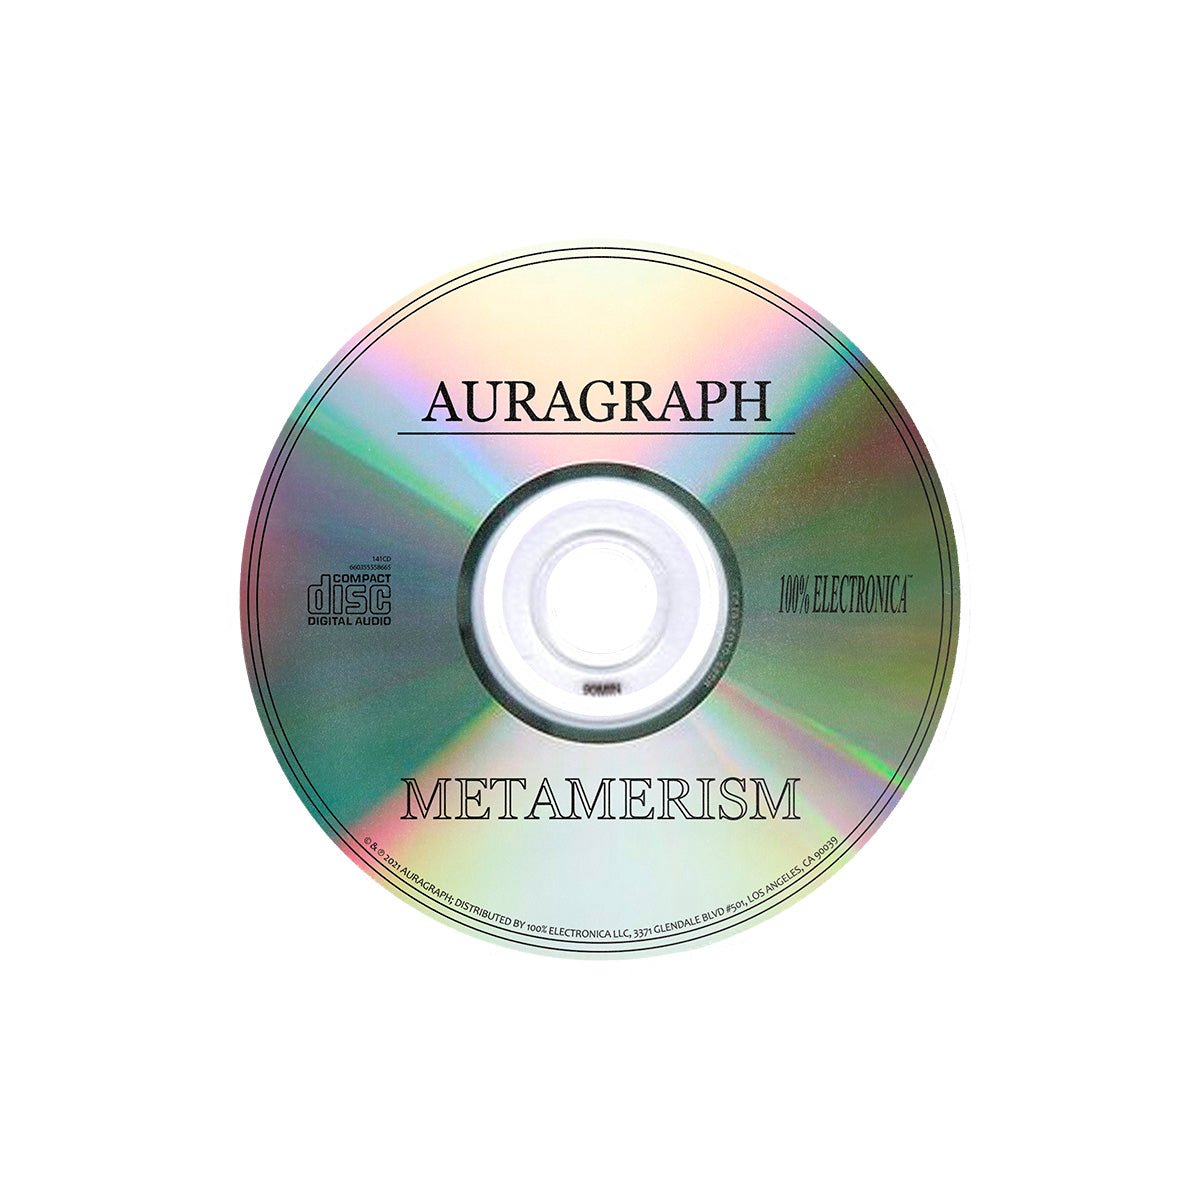 AURAGRAPH - Metamerism CD - 100% Electronica Official Store (Photo 2)